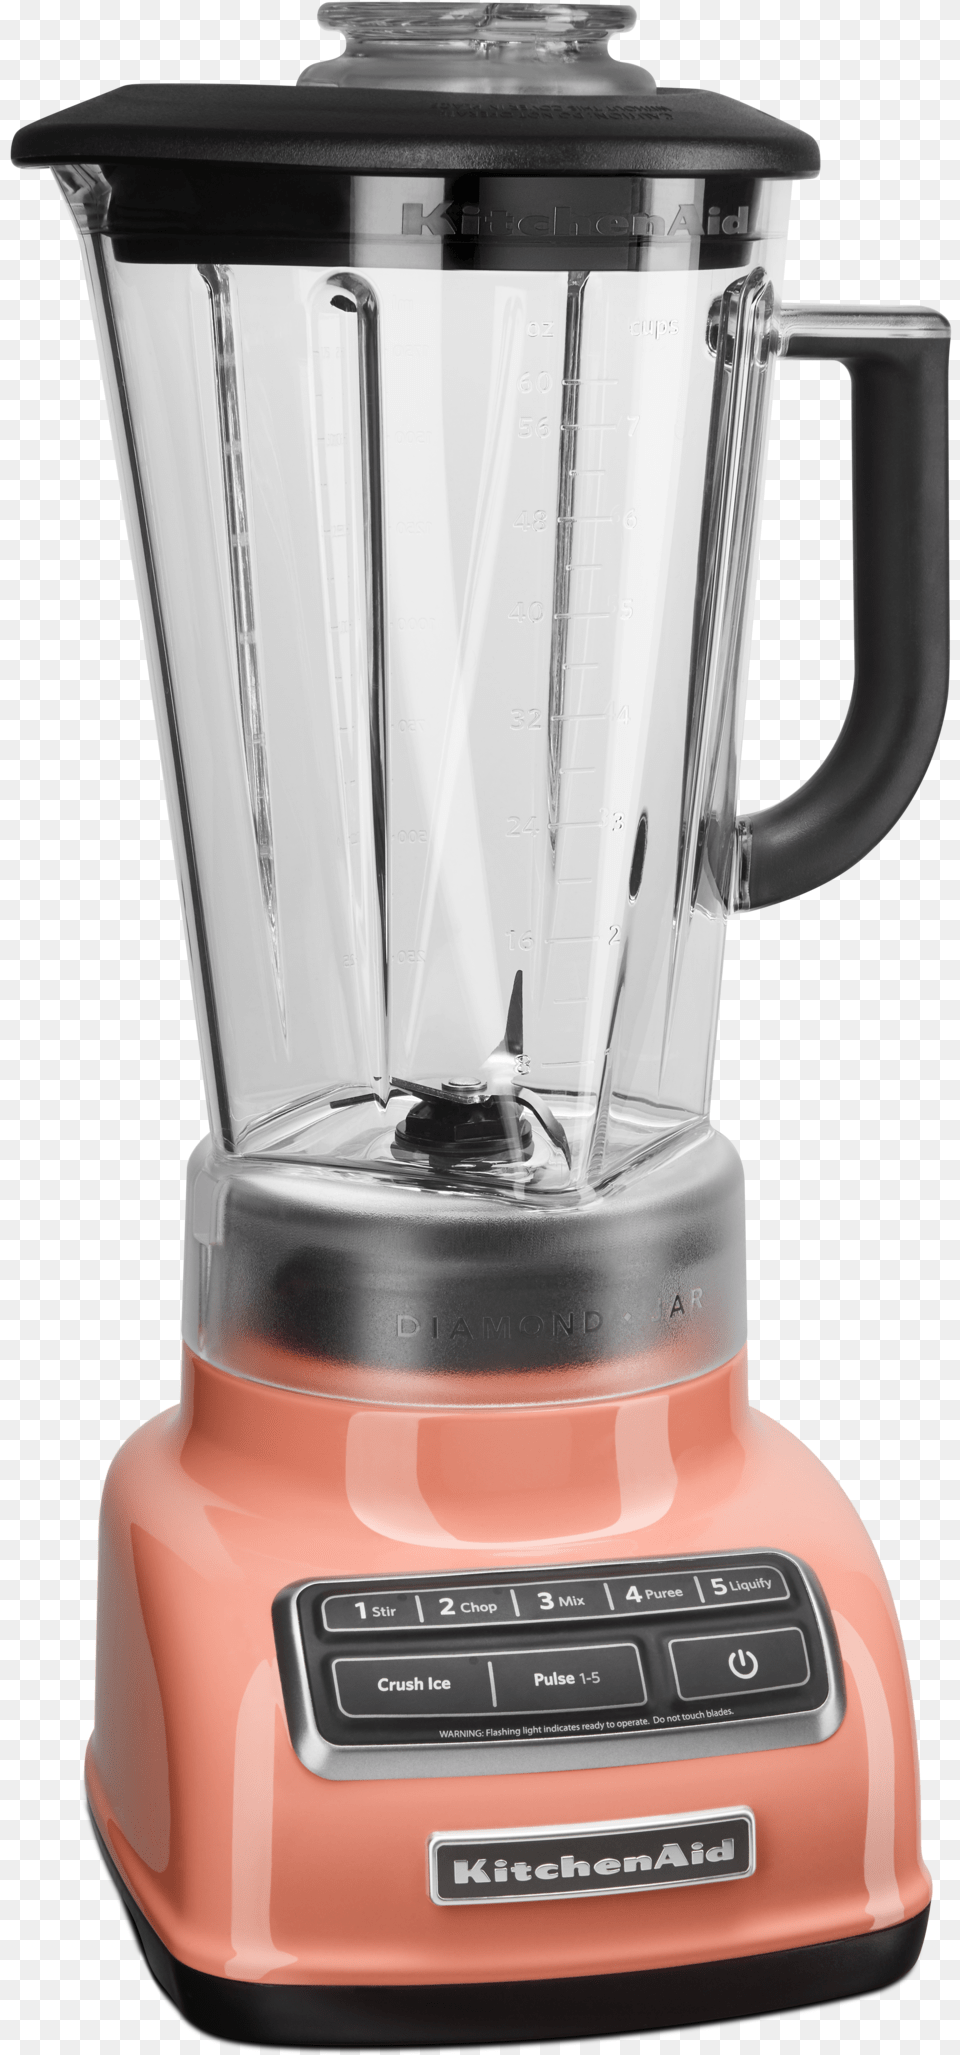 Kitchenaid 5 Speed Diamond Blender Bird Of Paradise Coral Kitchen Aid Appliances, Appliance, Device, Electrical Device, Mixer Png Image